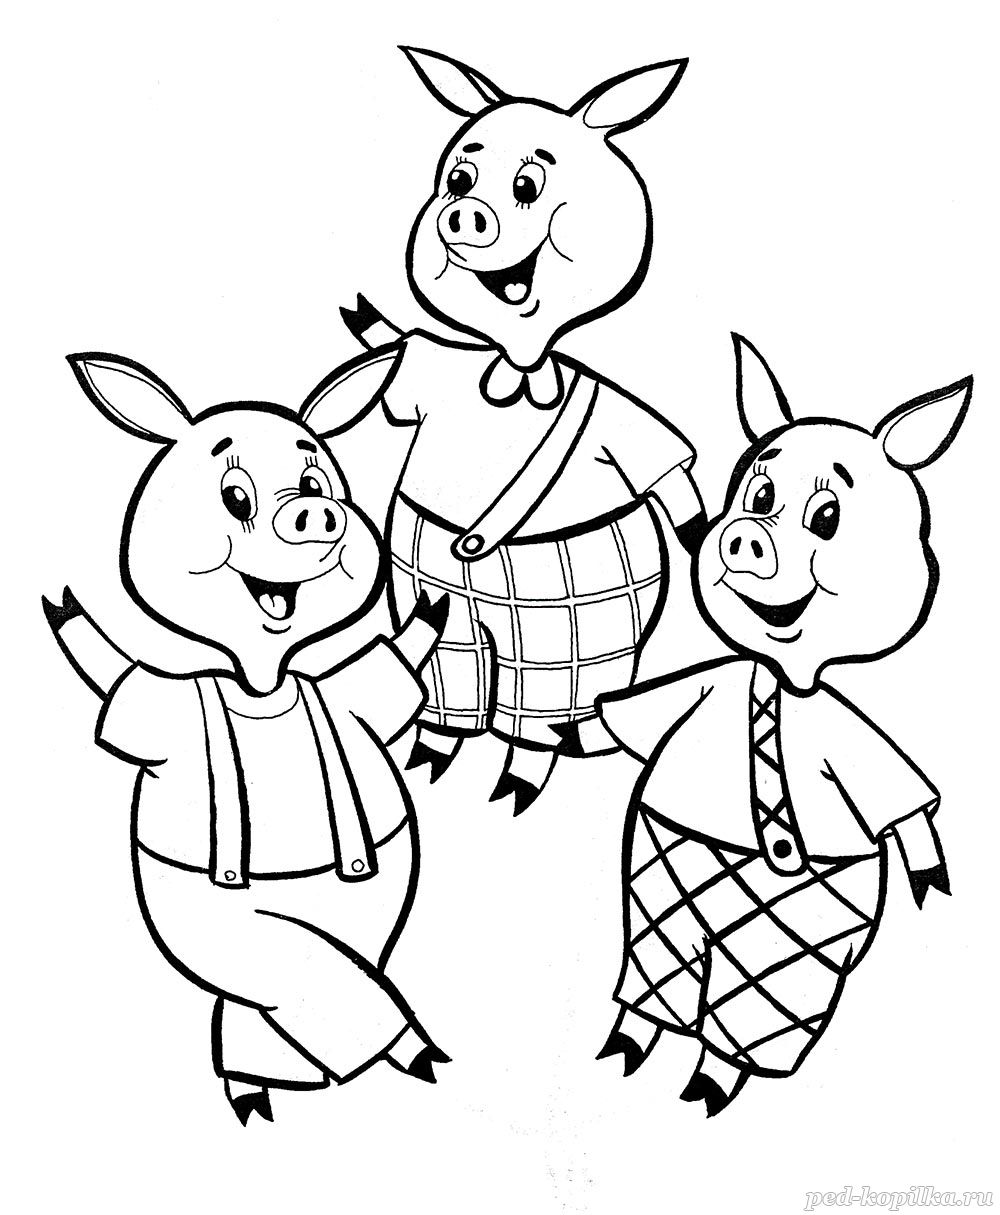 coloring-pages-of-the-three-little-pigs-houses-the-three-little-pigs